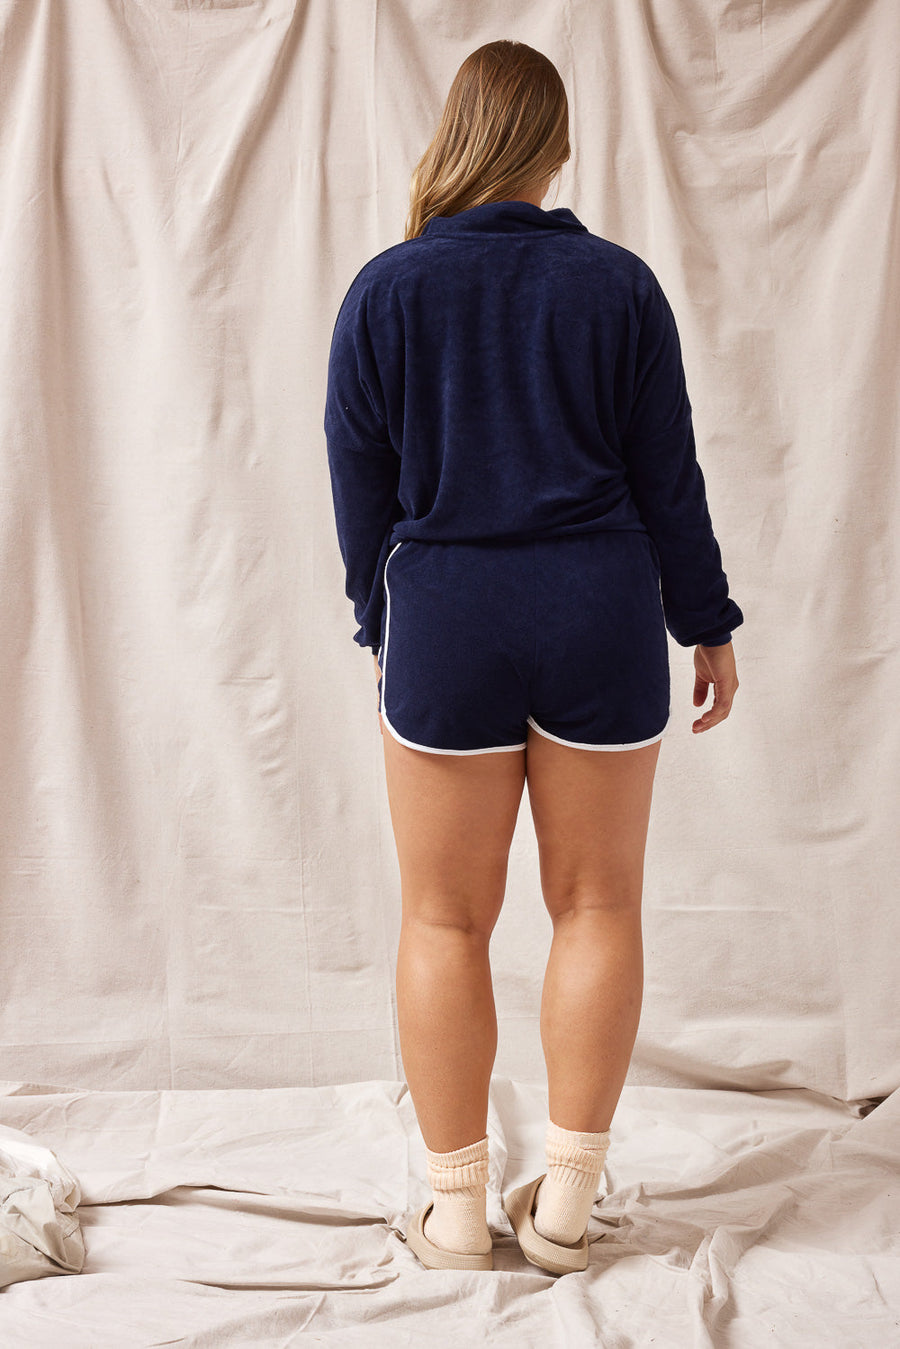 Navy Terry Pullover - Trixxi Wholesale